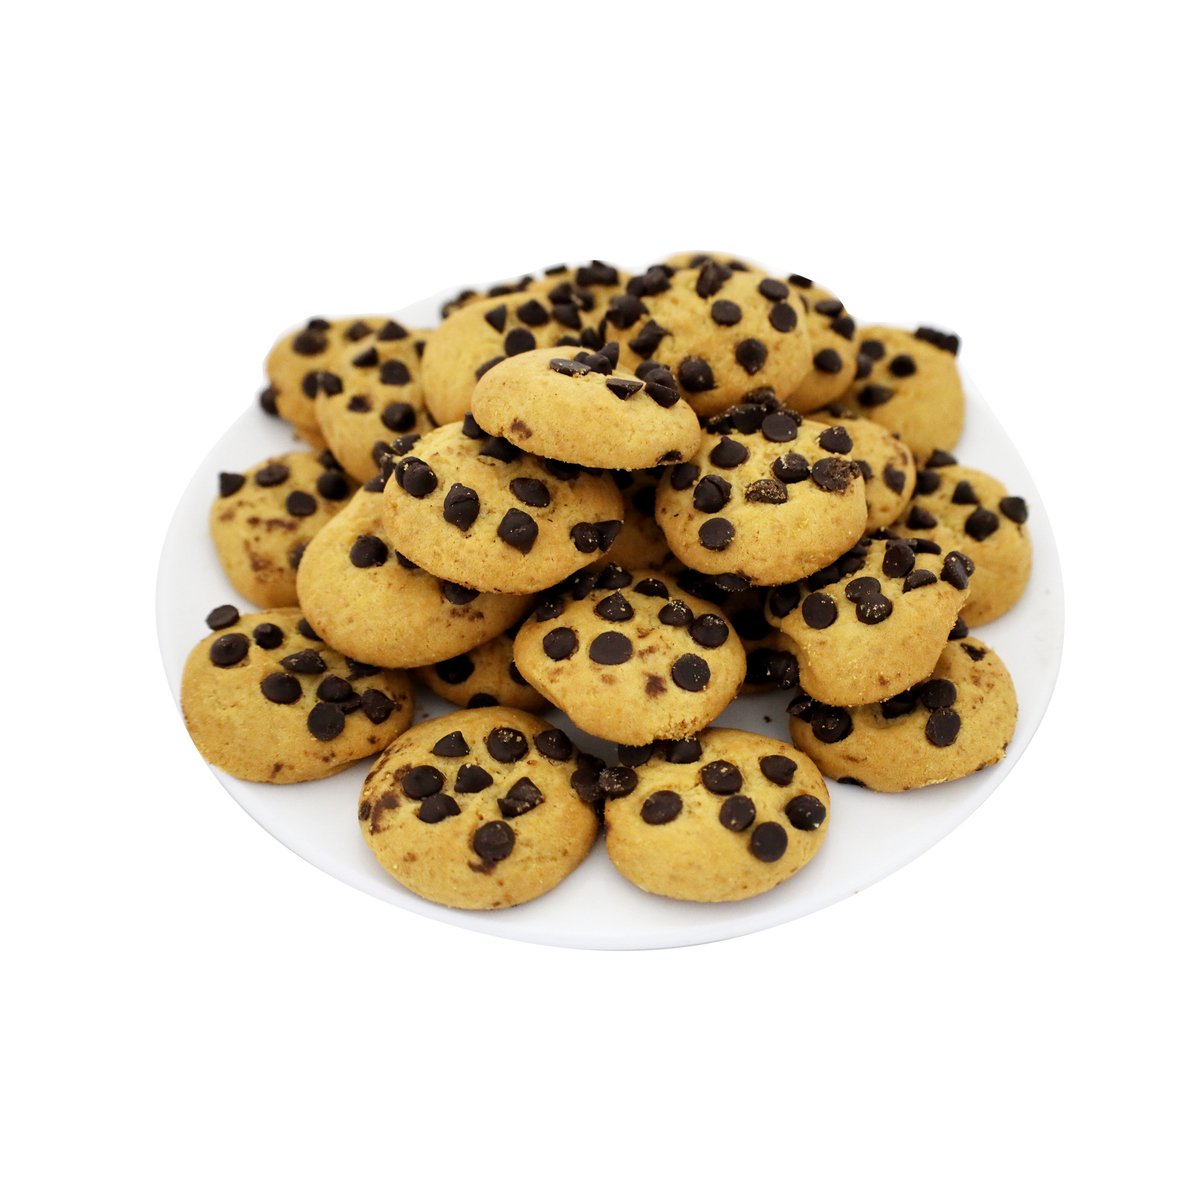 Lulu Small Choco Chip Cookies 250g Approx. weight